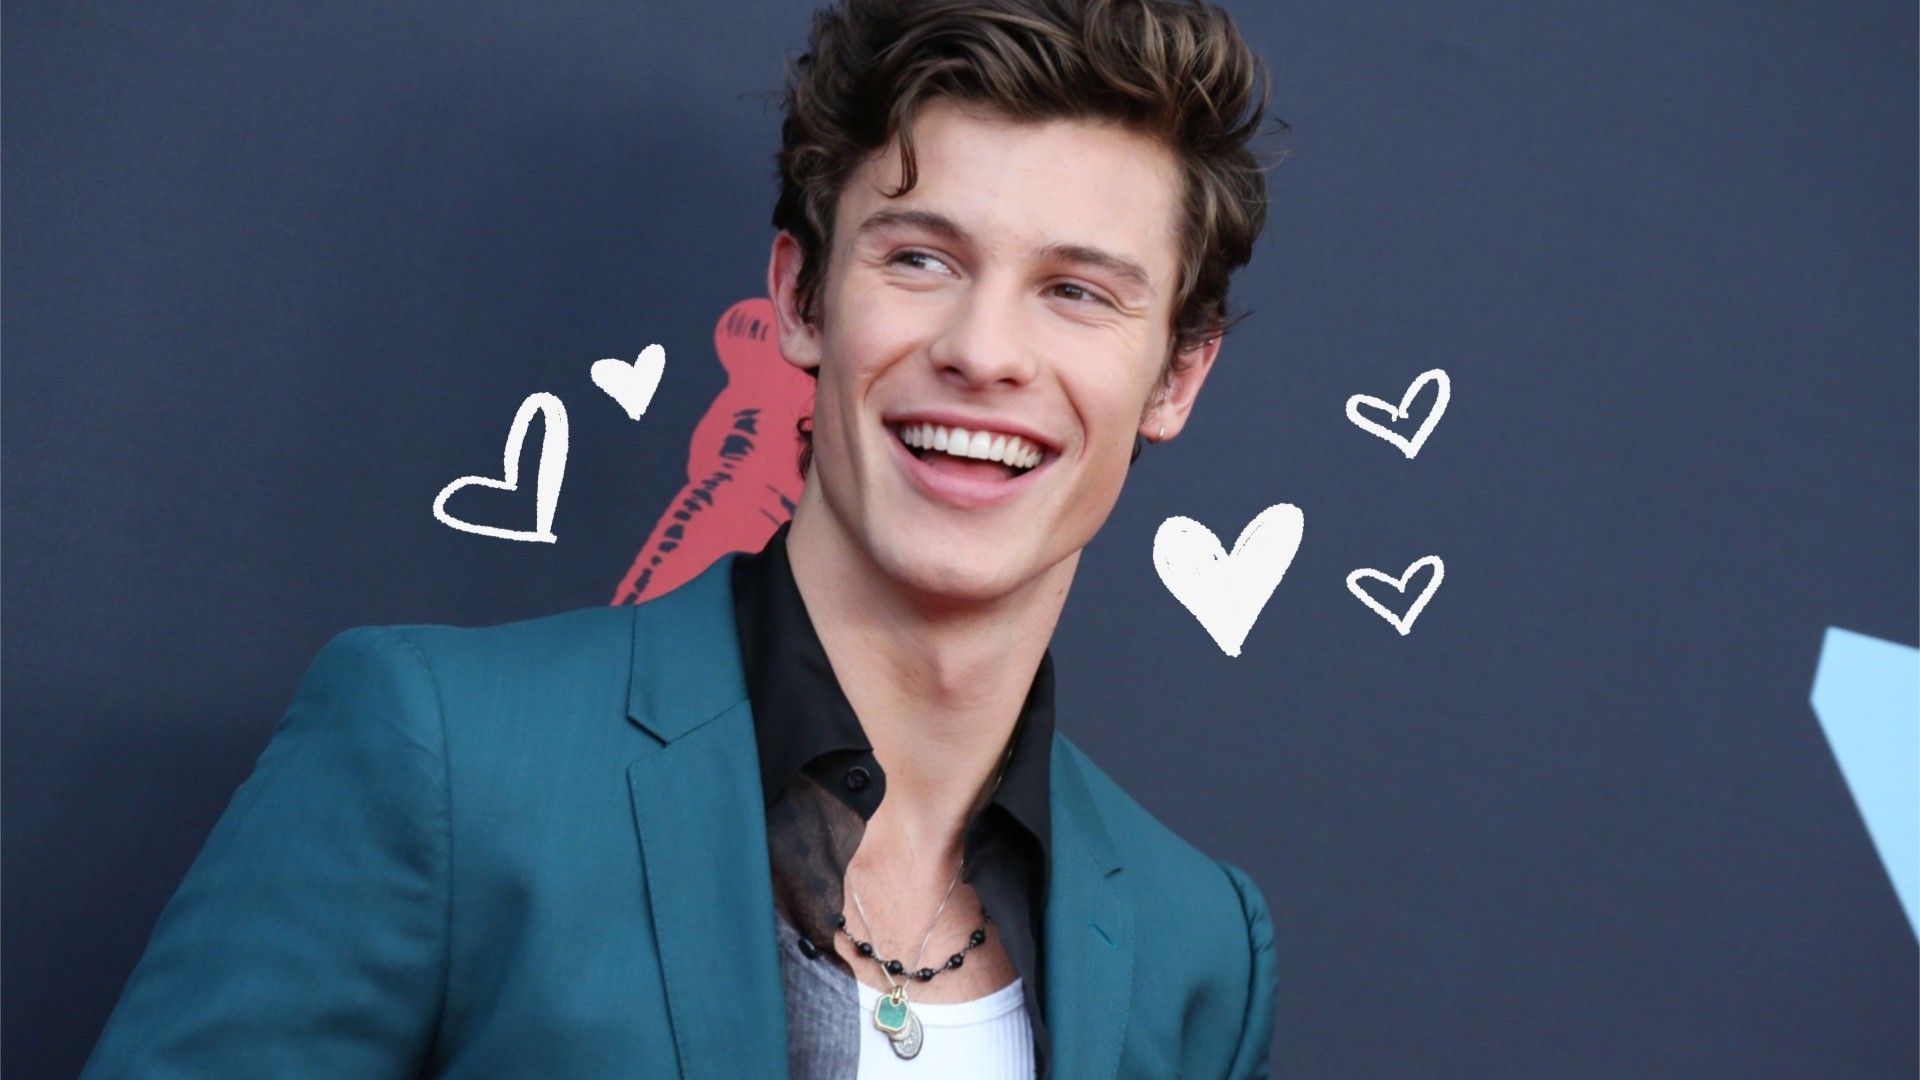 The 22-year-old Canadian singer and songwriter Shawn Mendes is smiling on the red carpet. - Shawn Mendes